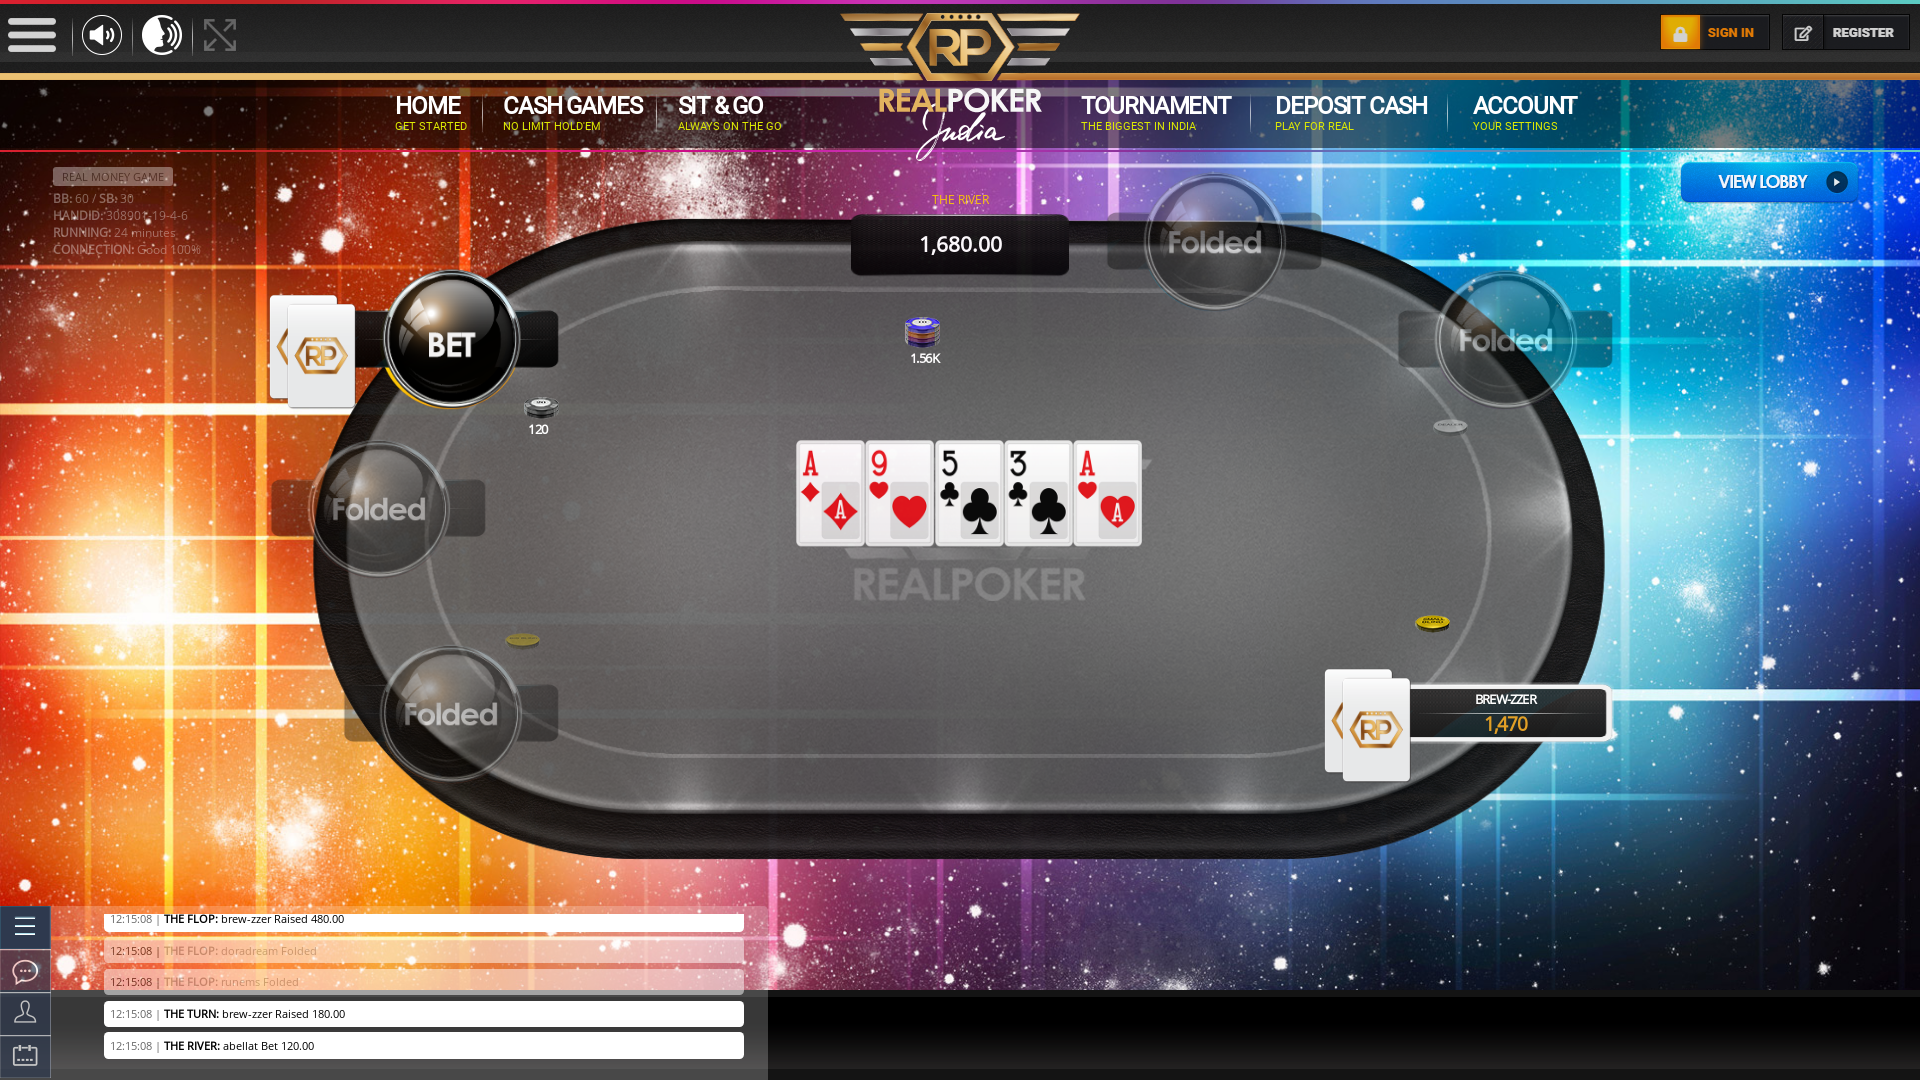 Real poker 10 player table in the 24th minute